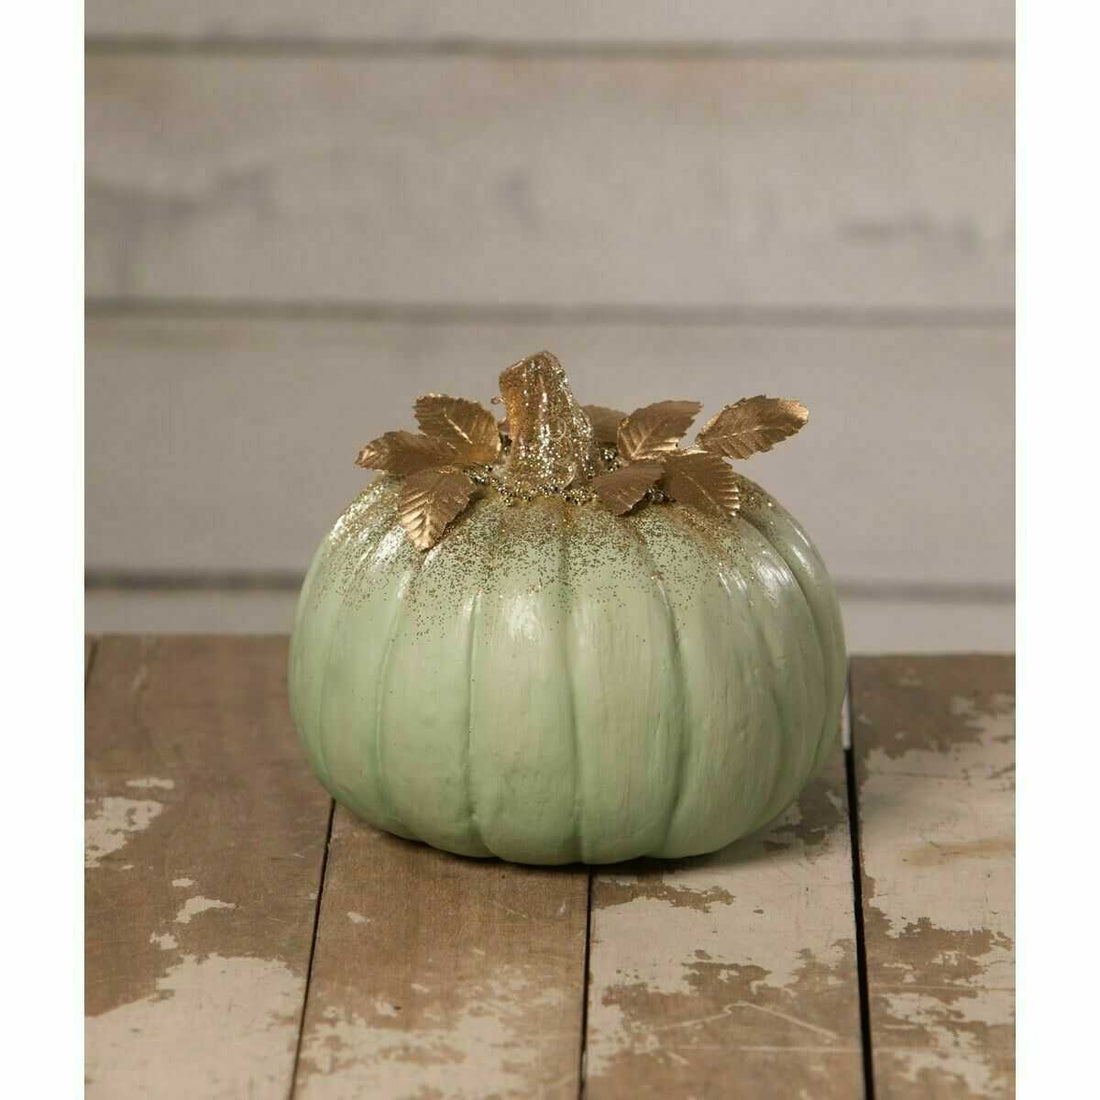 Bethany Lowe Autumn Elegant Green Pumpkin TD0075 - The Primitive Pineapple Collection